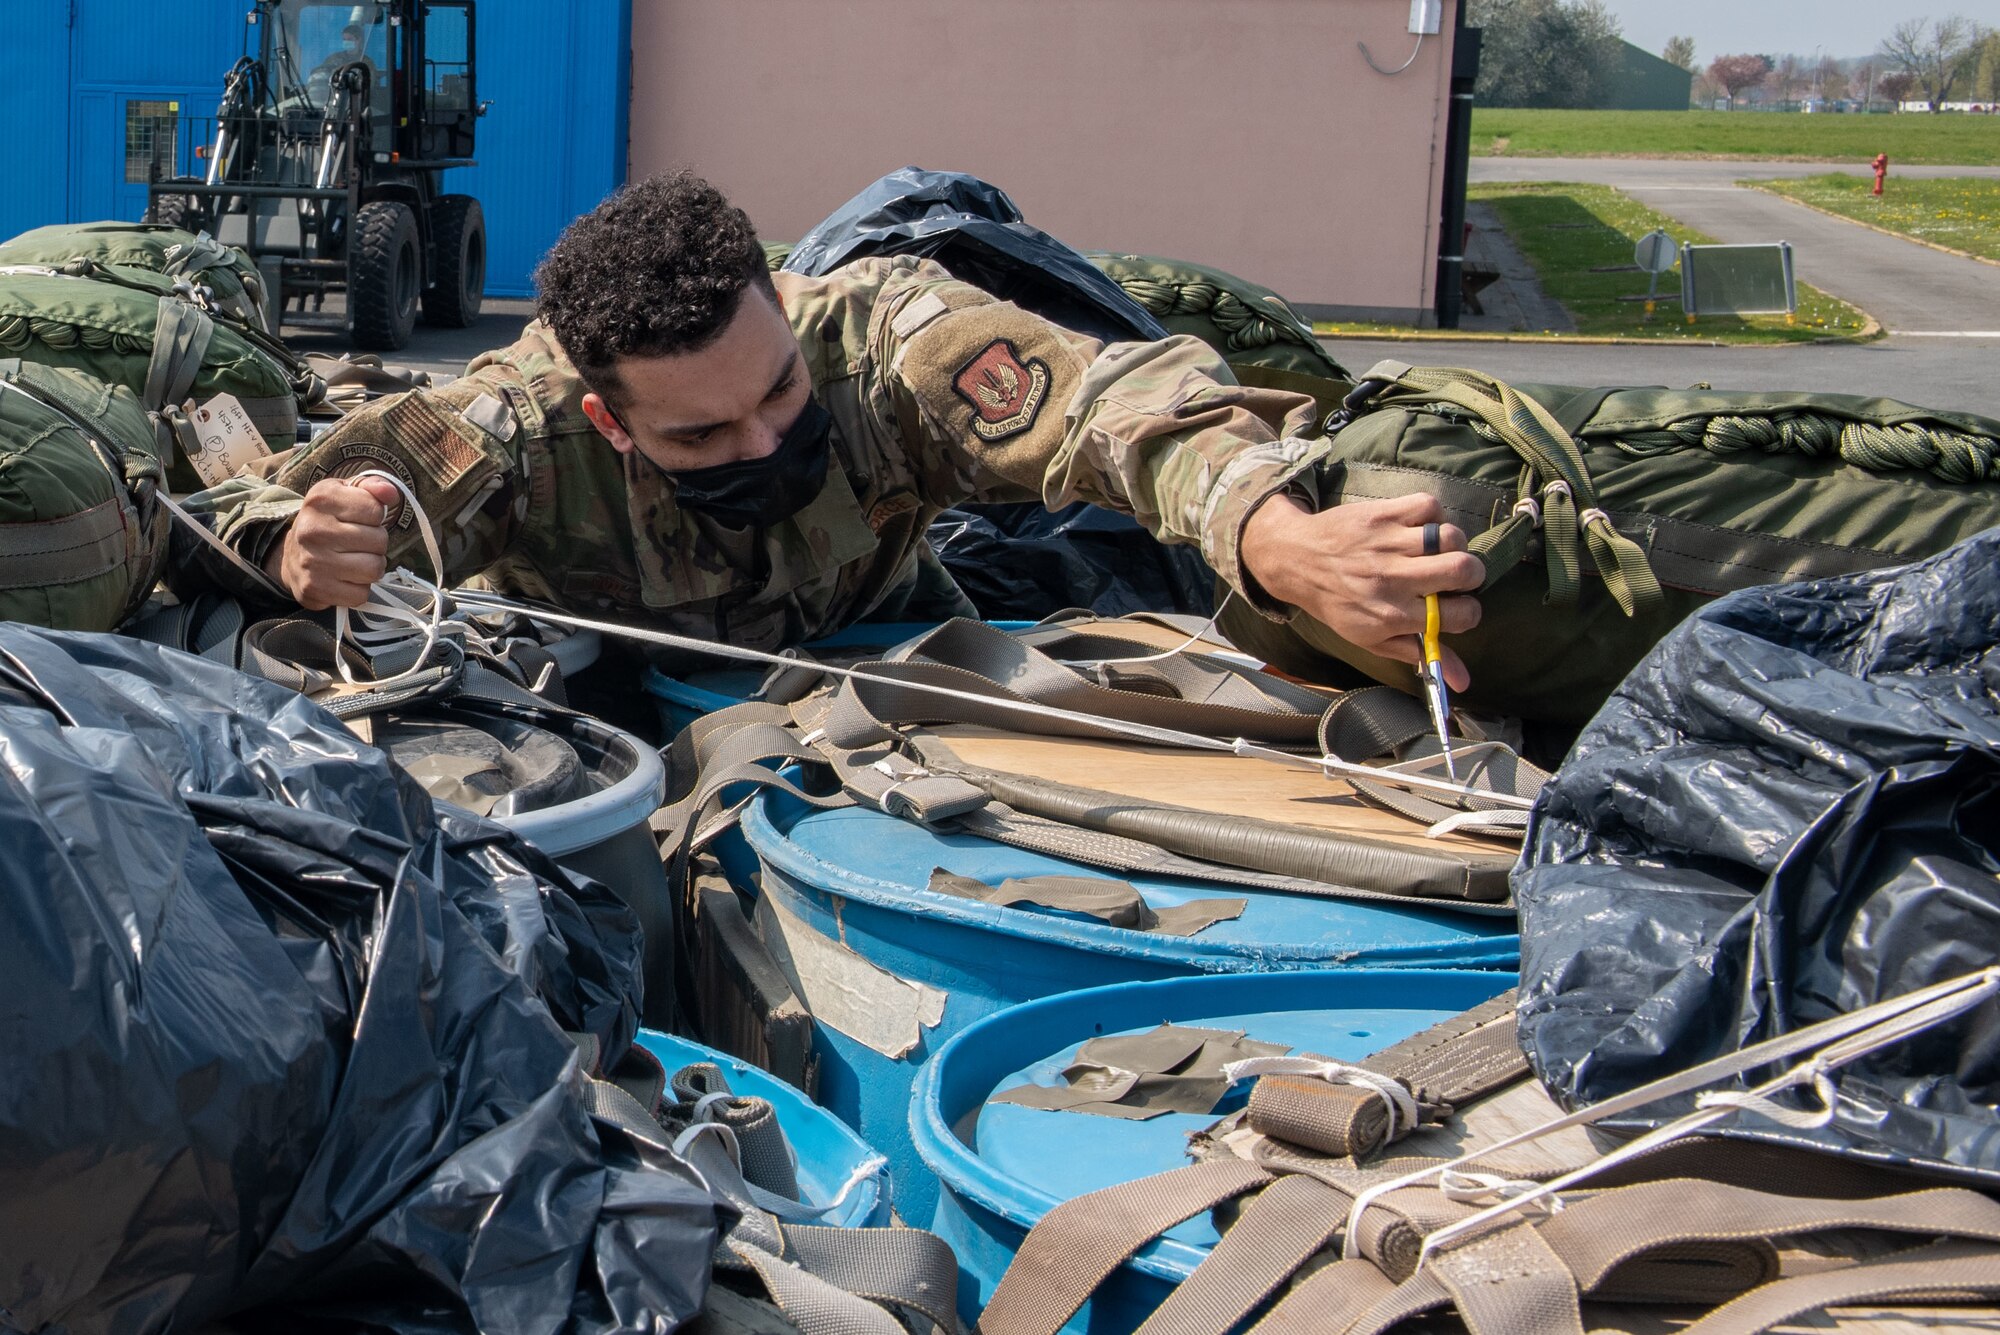 An Airman removes straps from a pallet